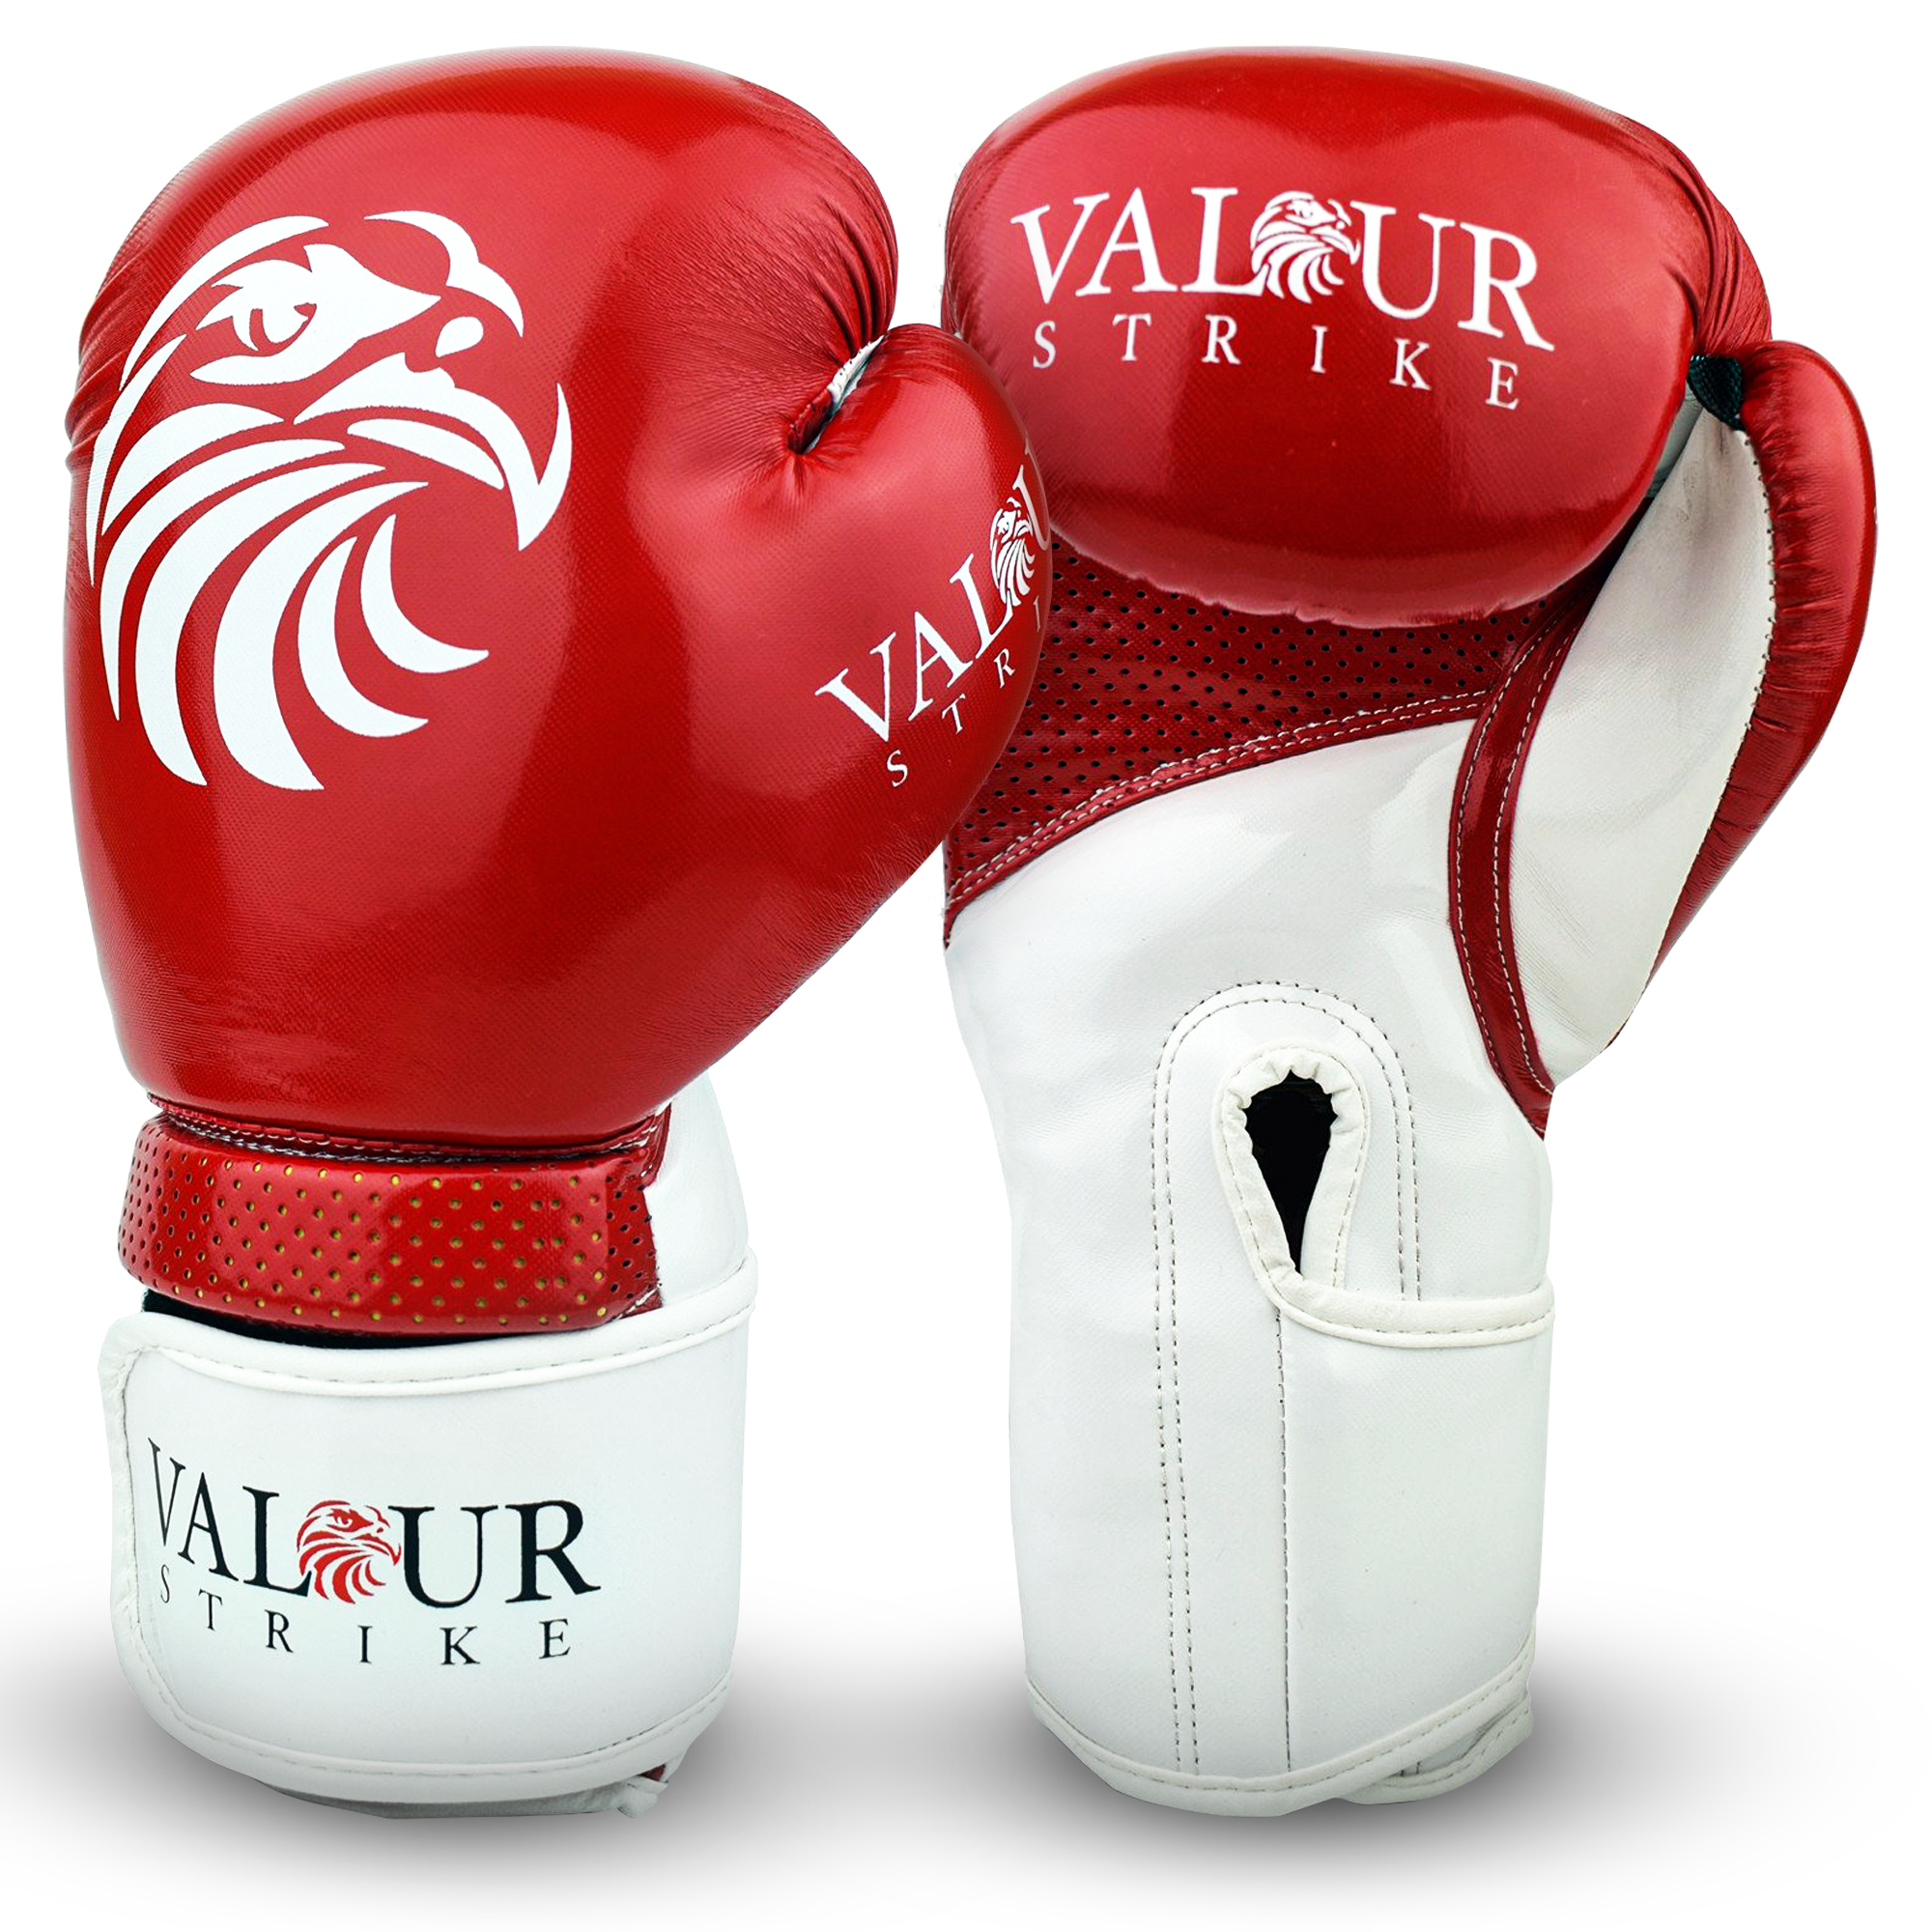 Valour Strike Red Boxing Gloves - Free UK Delivery